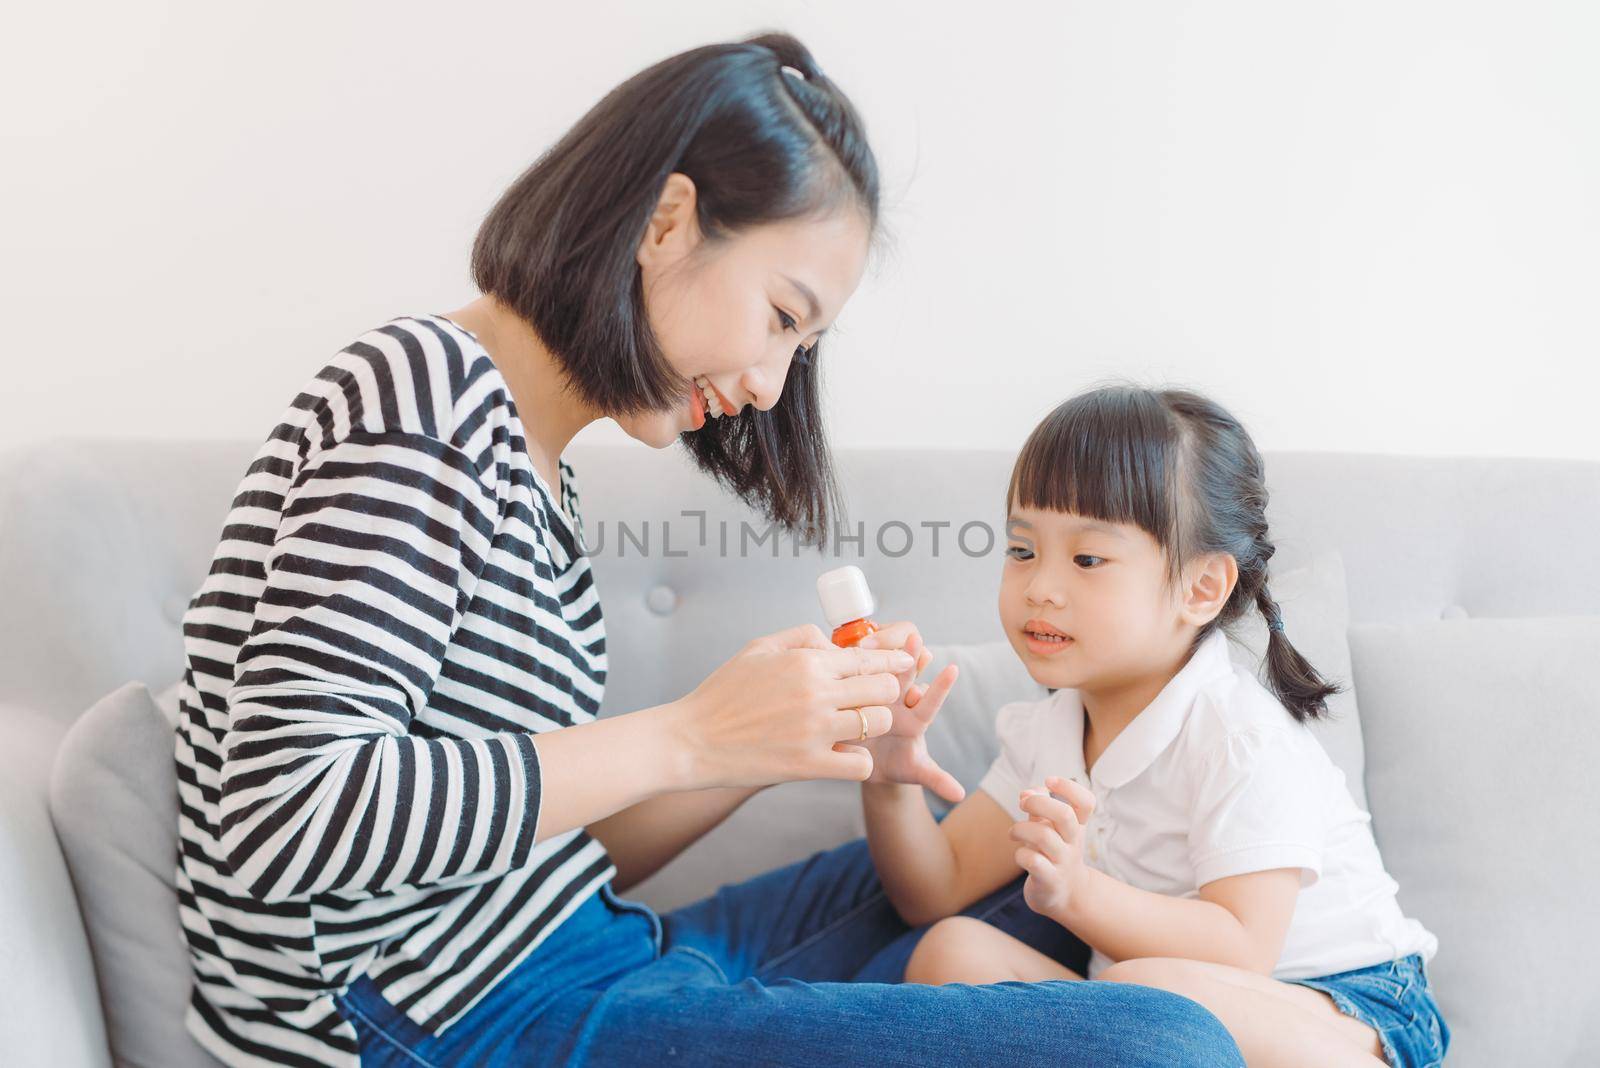 Mom paints nails to daughter